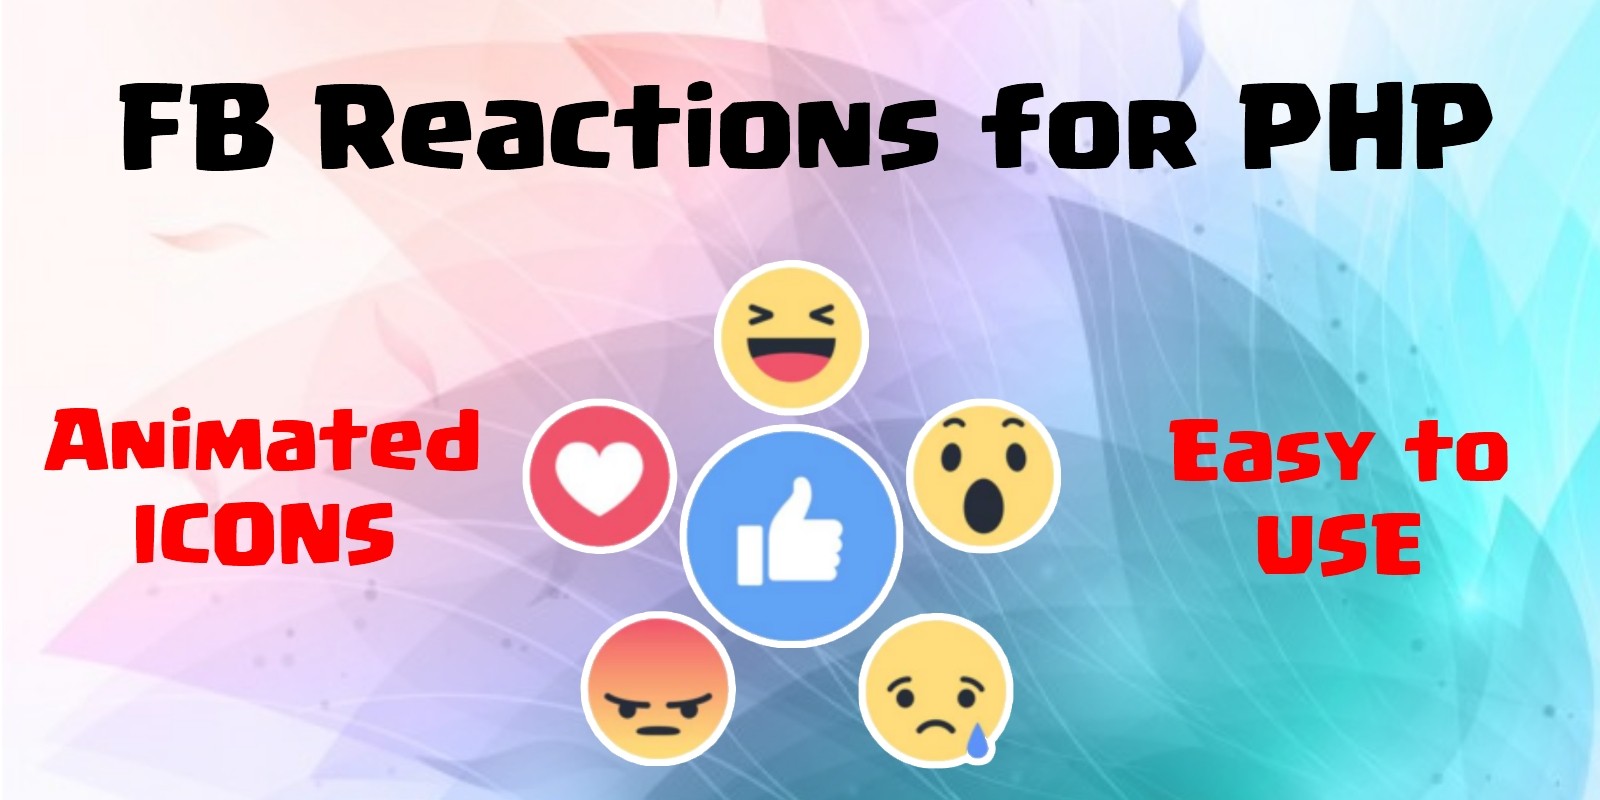 FB Reactions for PHP